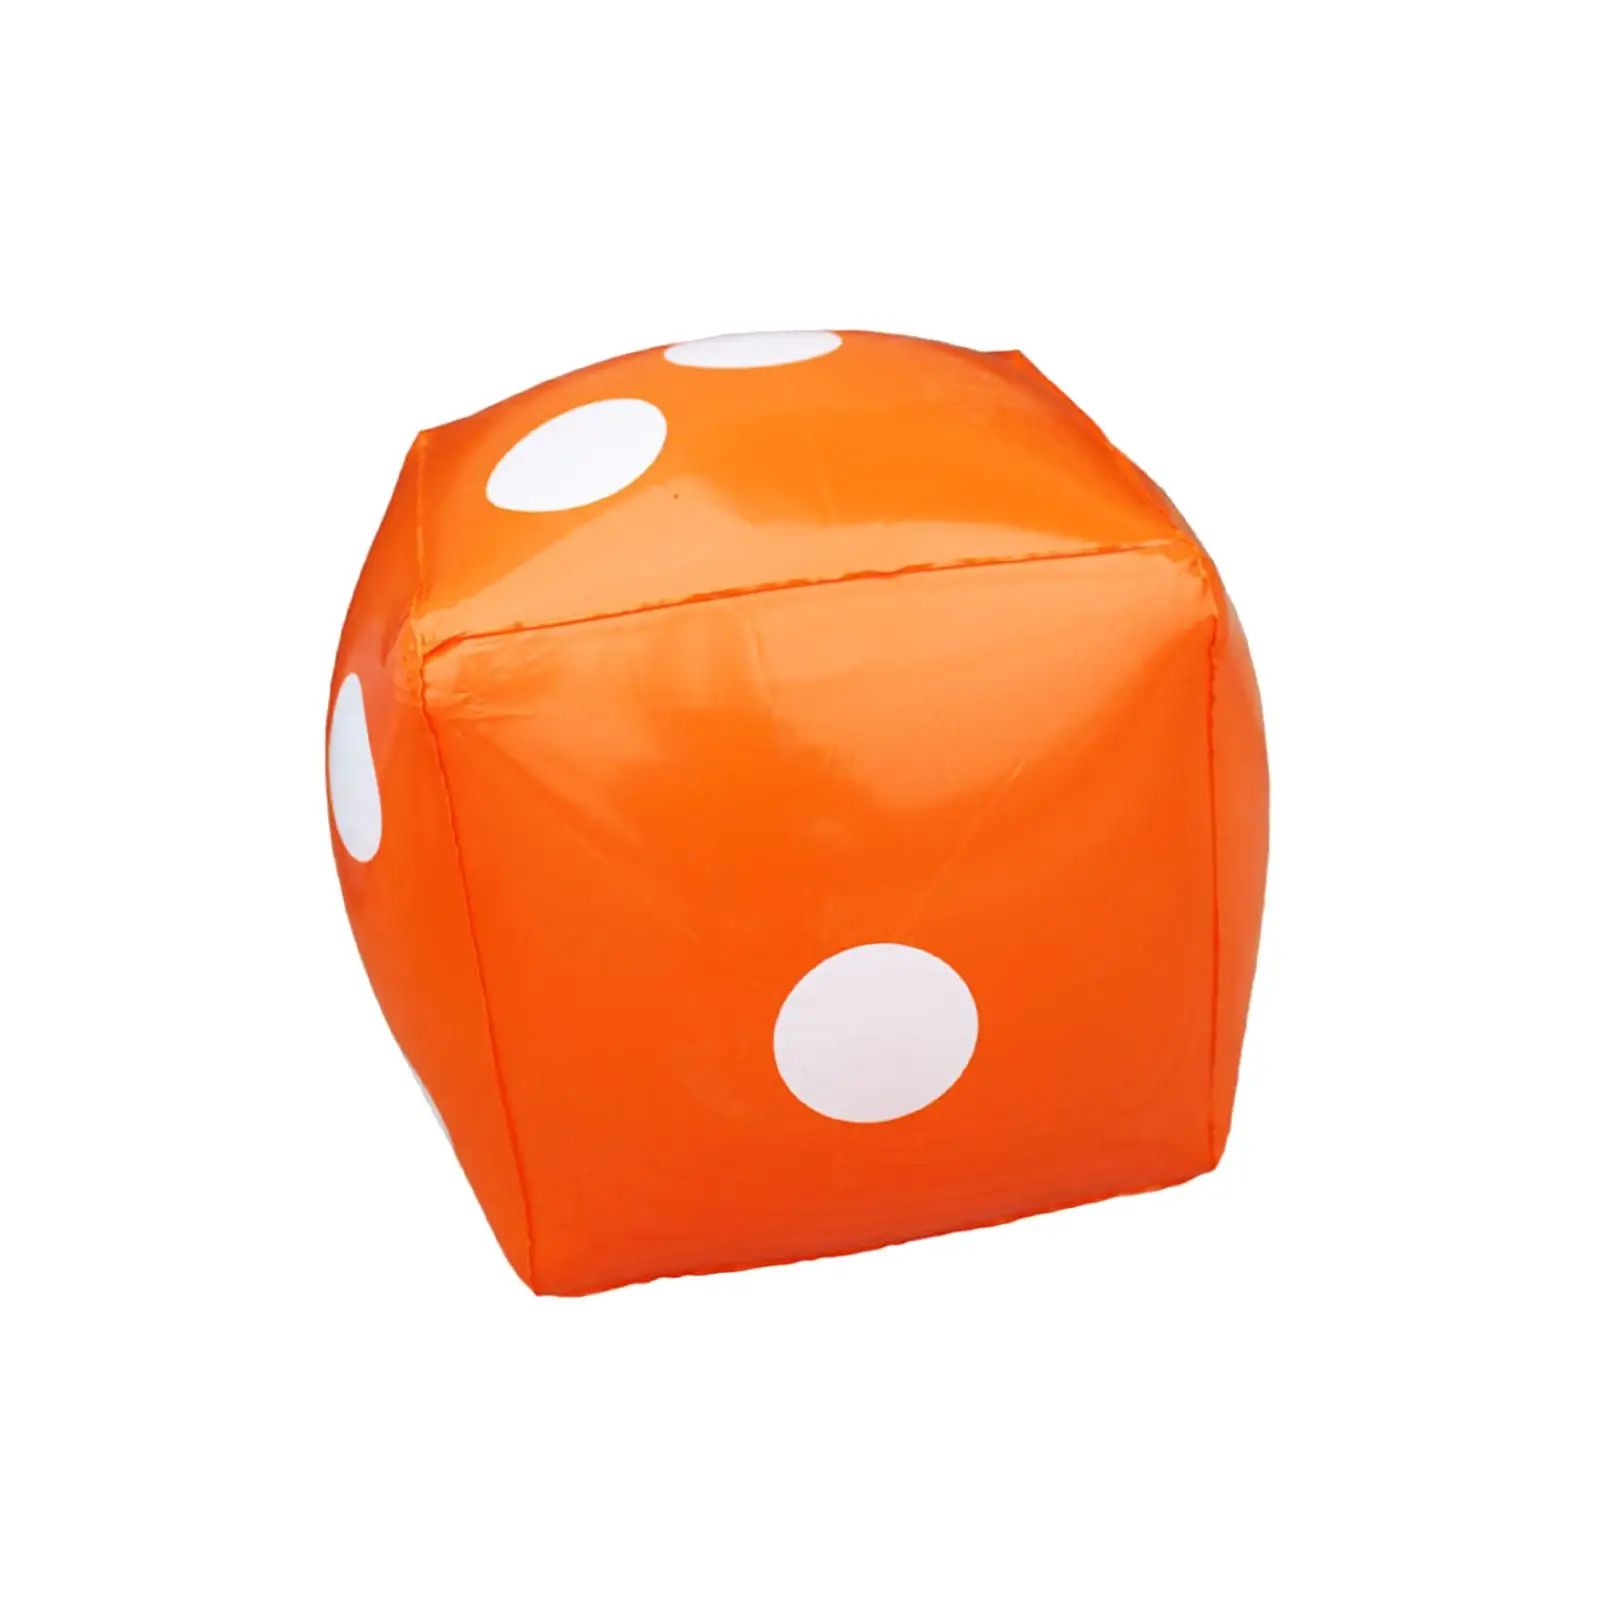 Inflate Dice Funny Swimming Flotation 60cm Swimming Pool Dices for Kids Toys Stage Props Backyard Party Favors Children Adult